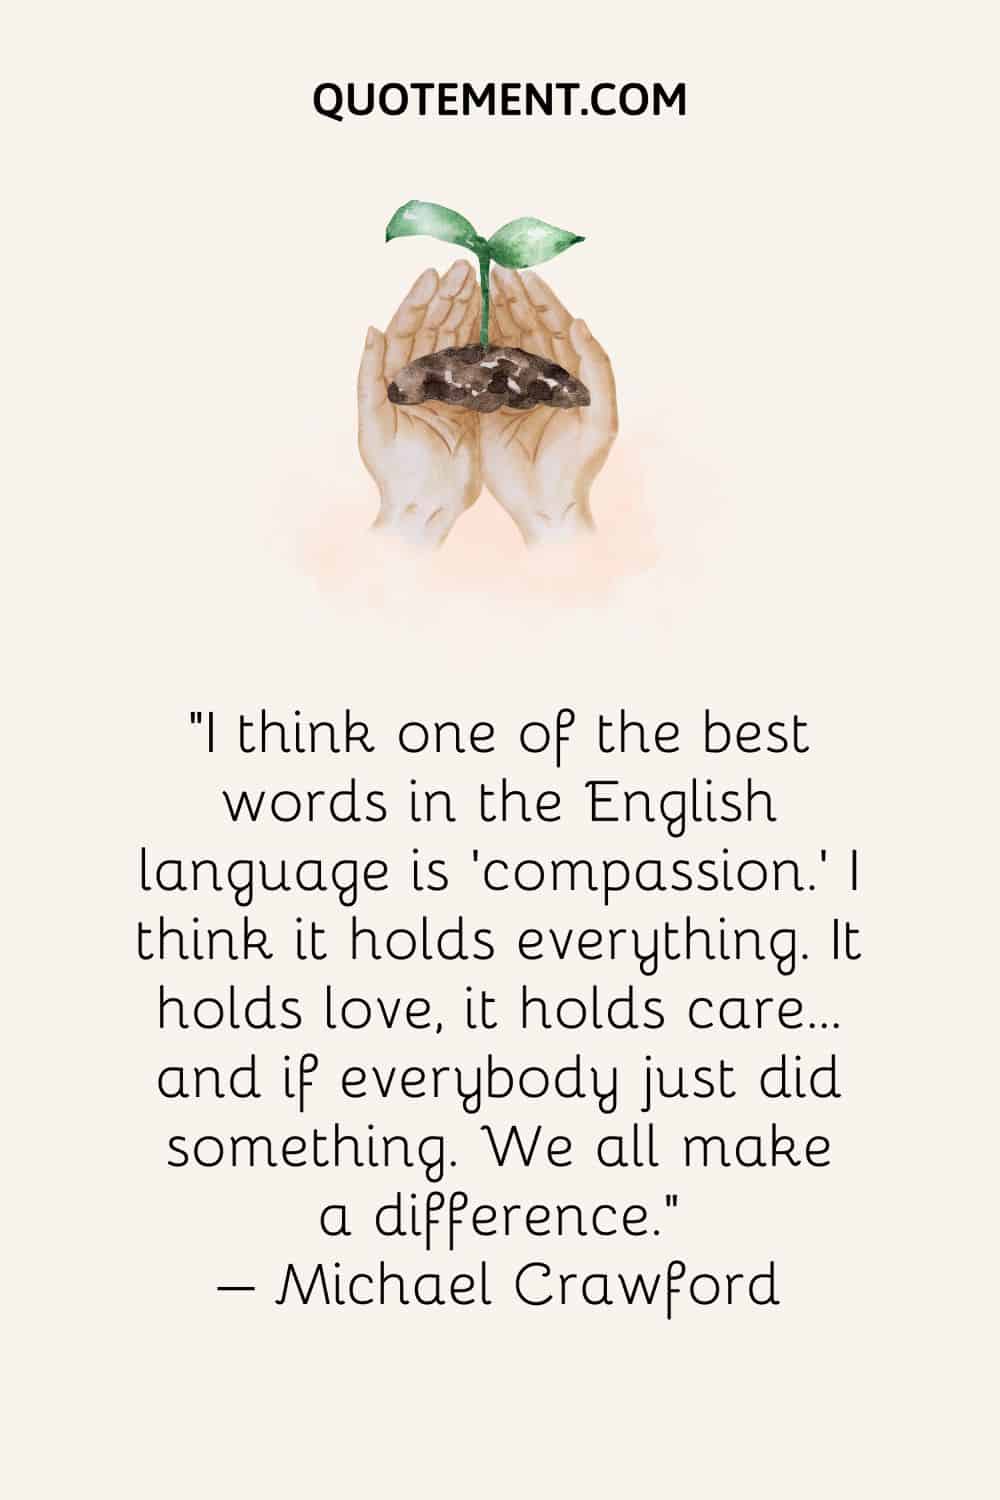 I think one of the best words in the English language is 'compassion.'